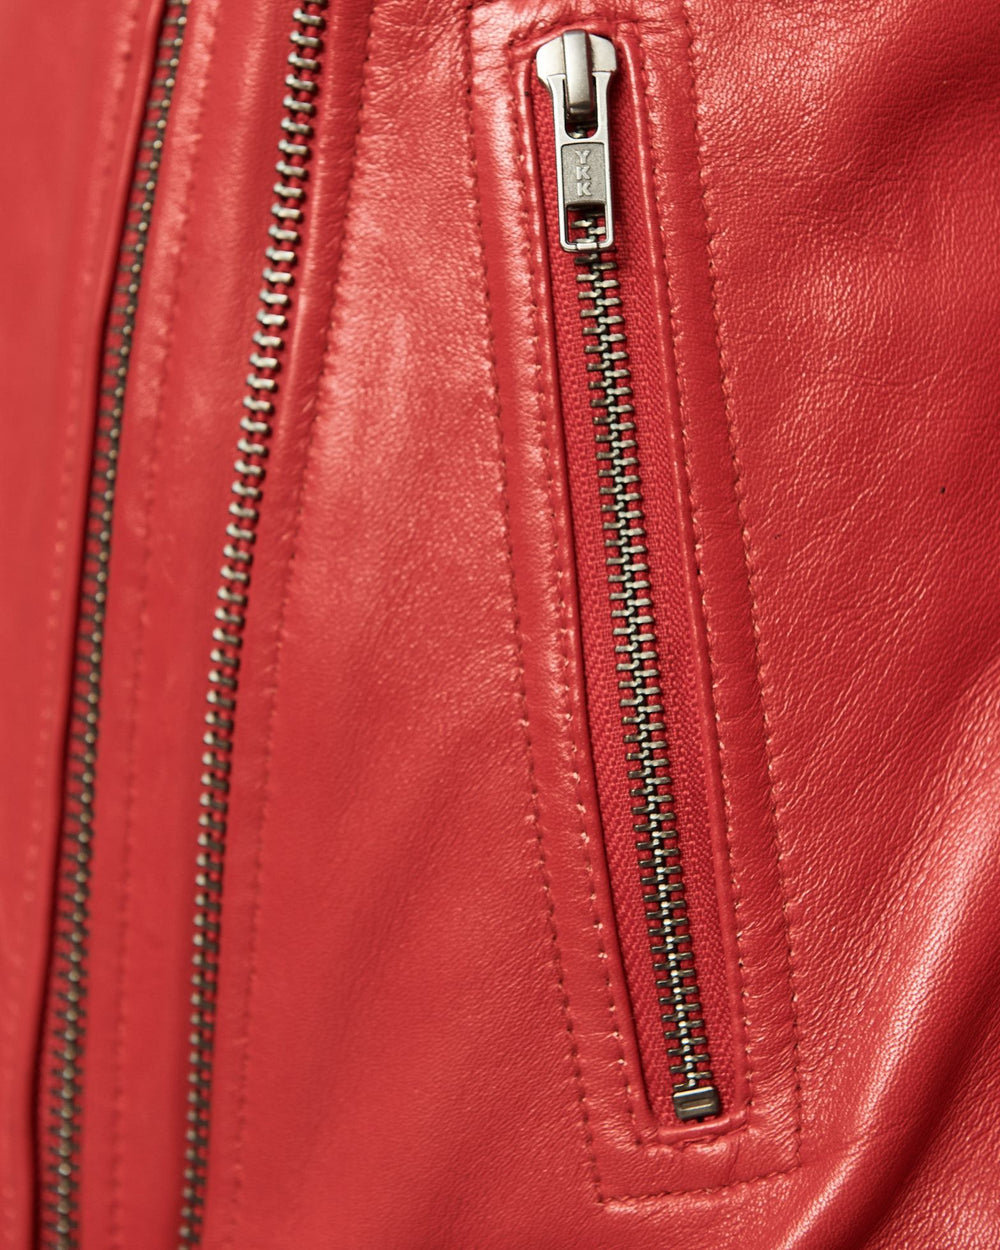 MODERN VICE DOUBLE ZIP MOTO JACKET in CANDY RED